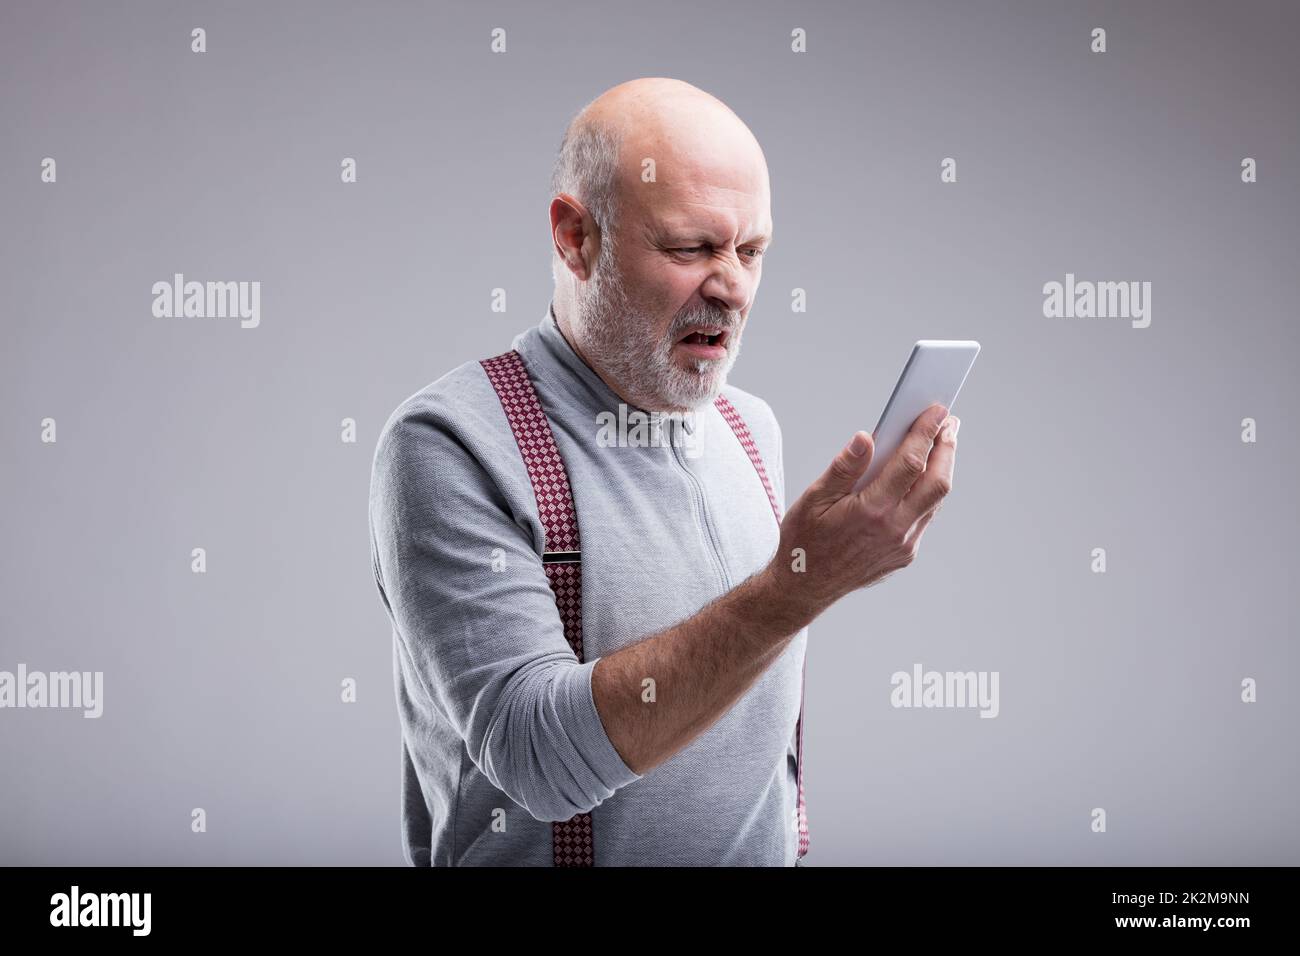 these useless gadgets never work at all Stock Photo